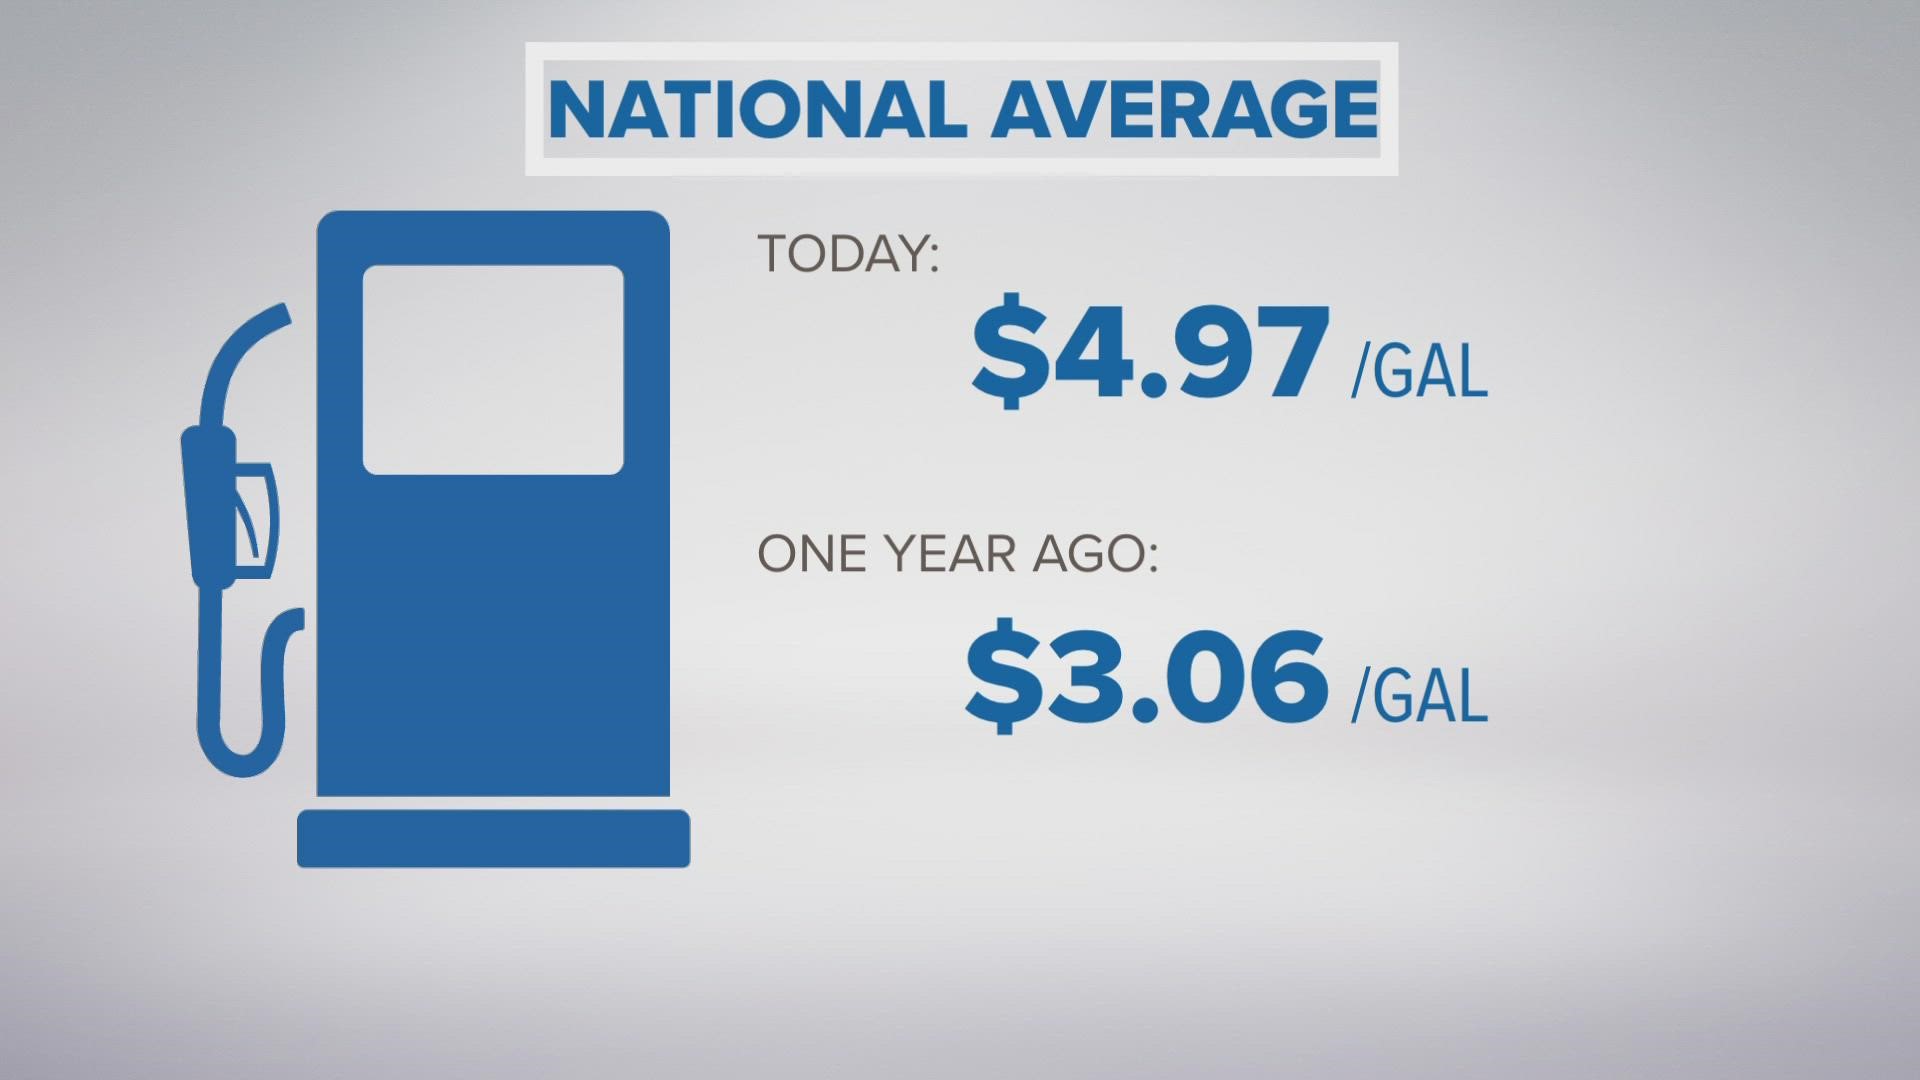 The gas-tracking platform confirmed the pricey milestone Thursday after months of rising fuel prices.